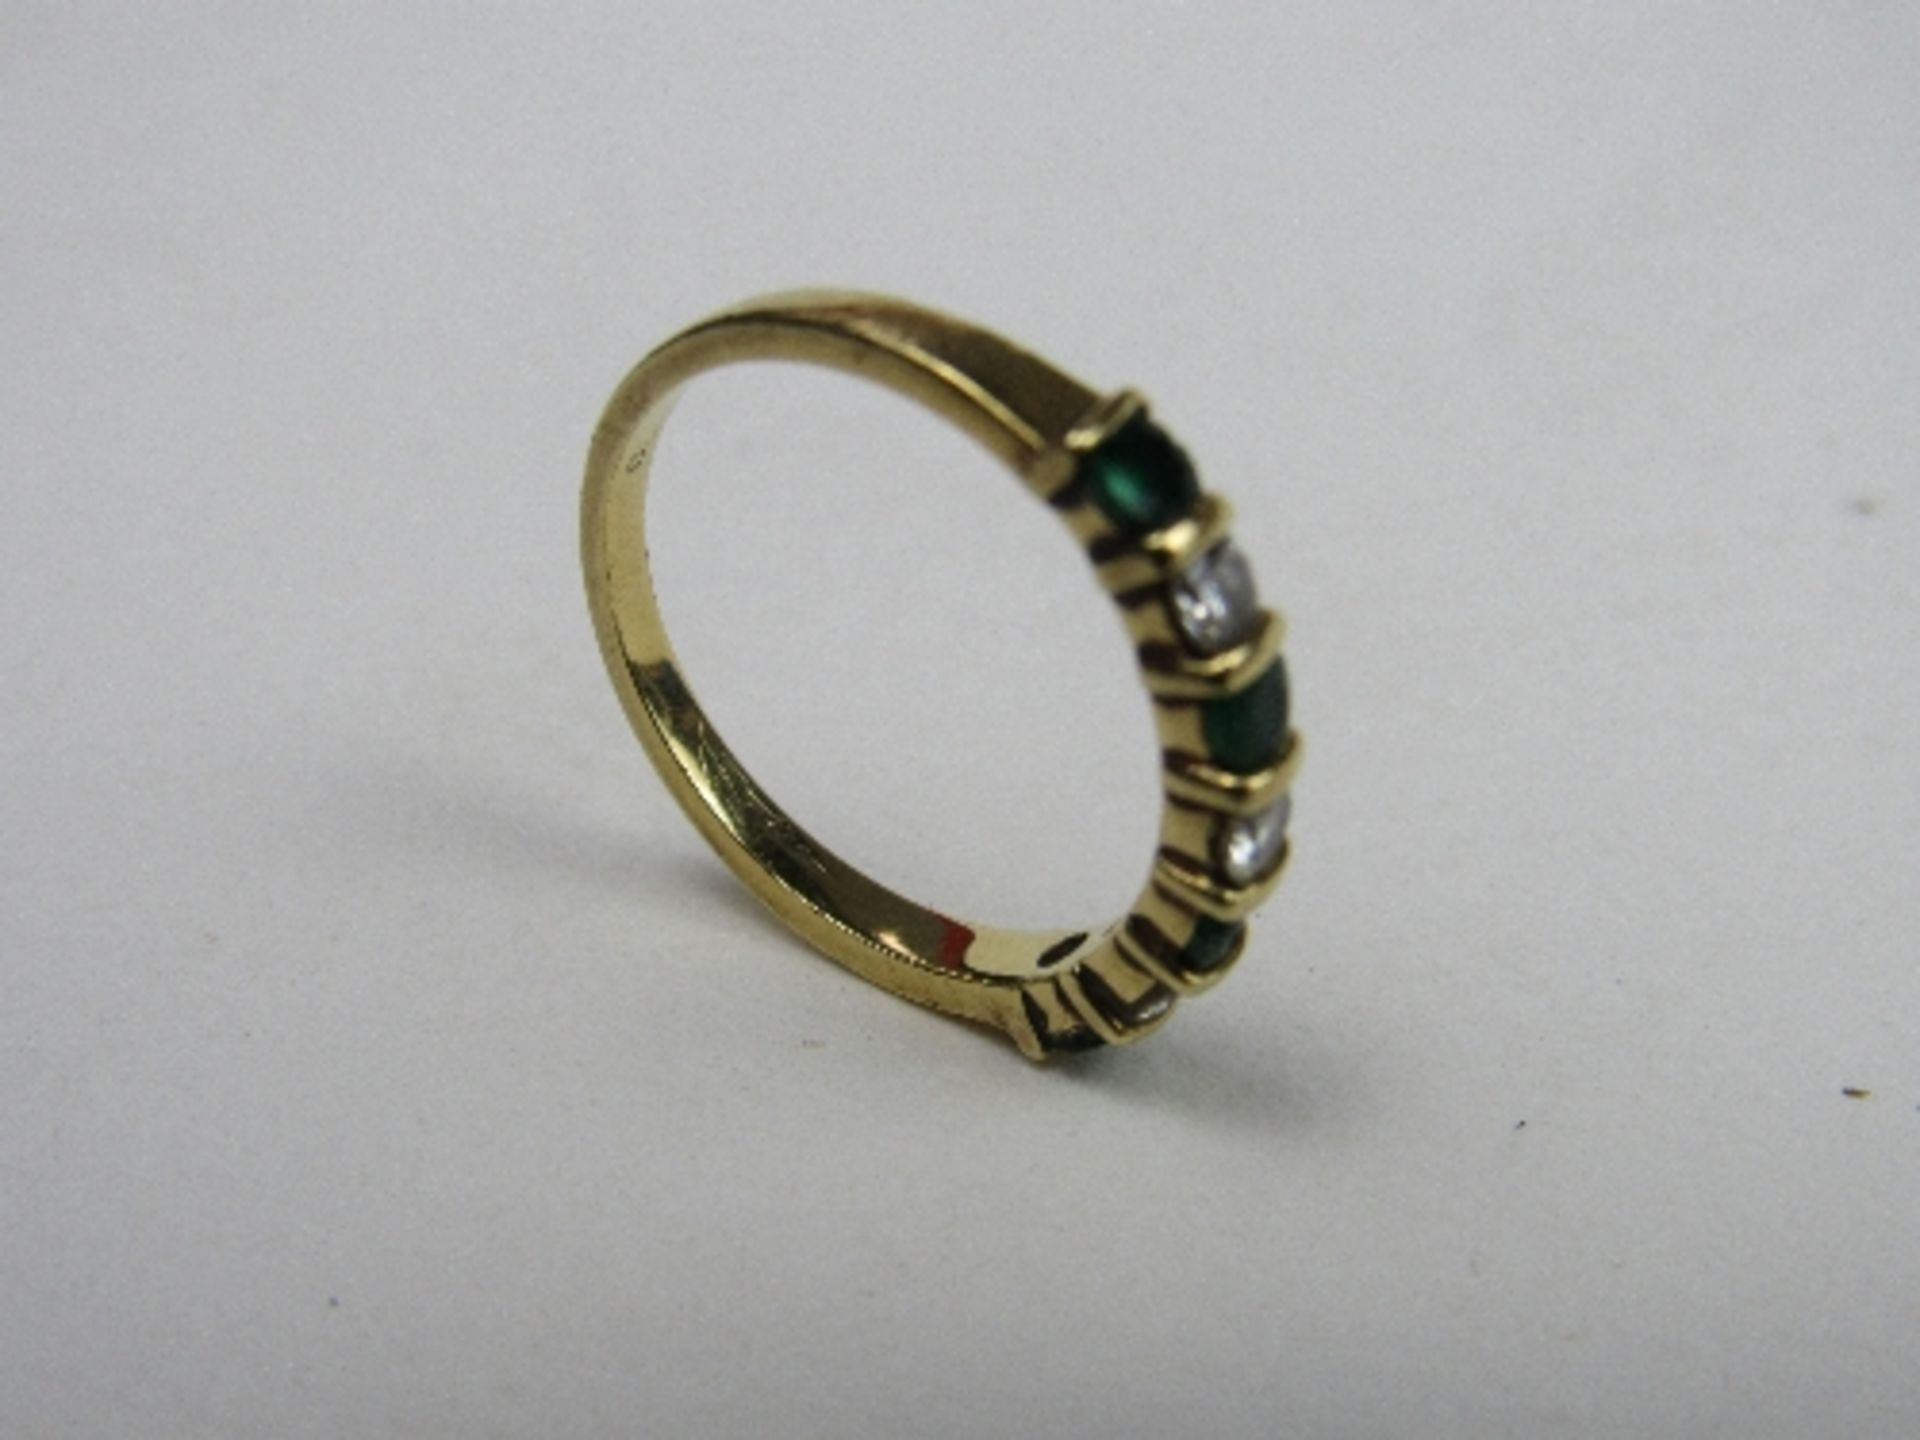 Gold ring set with emeralds & diamonds, weight 2.6gms, size L 1/2. Price guide £40-60. - Image 2 of 2